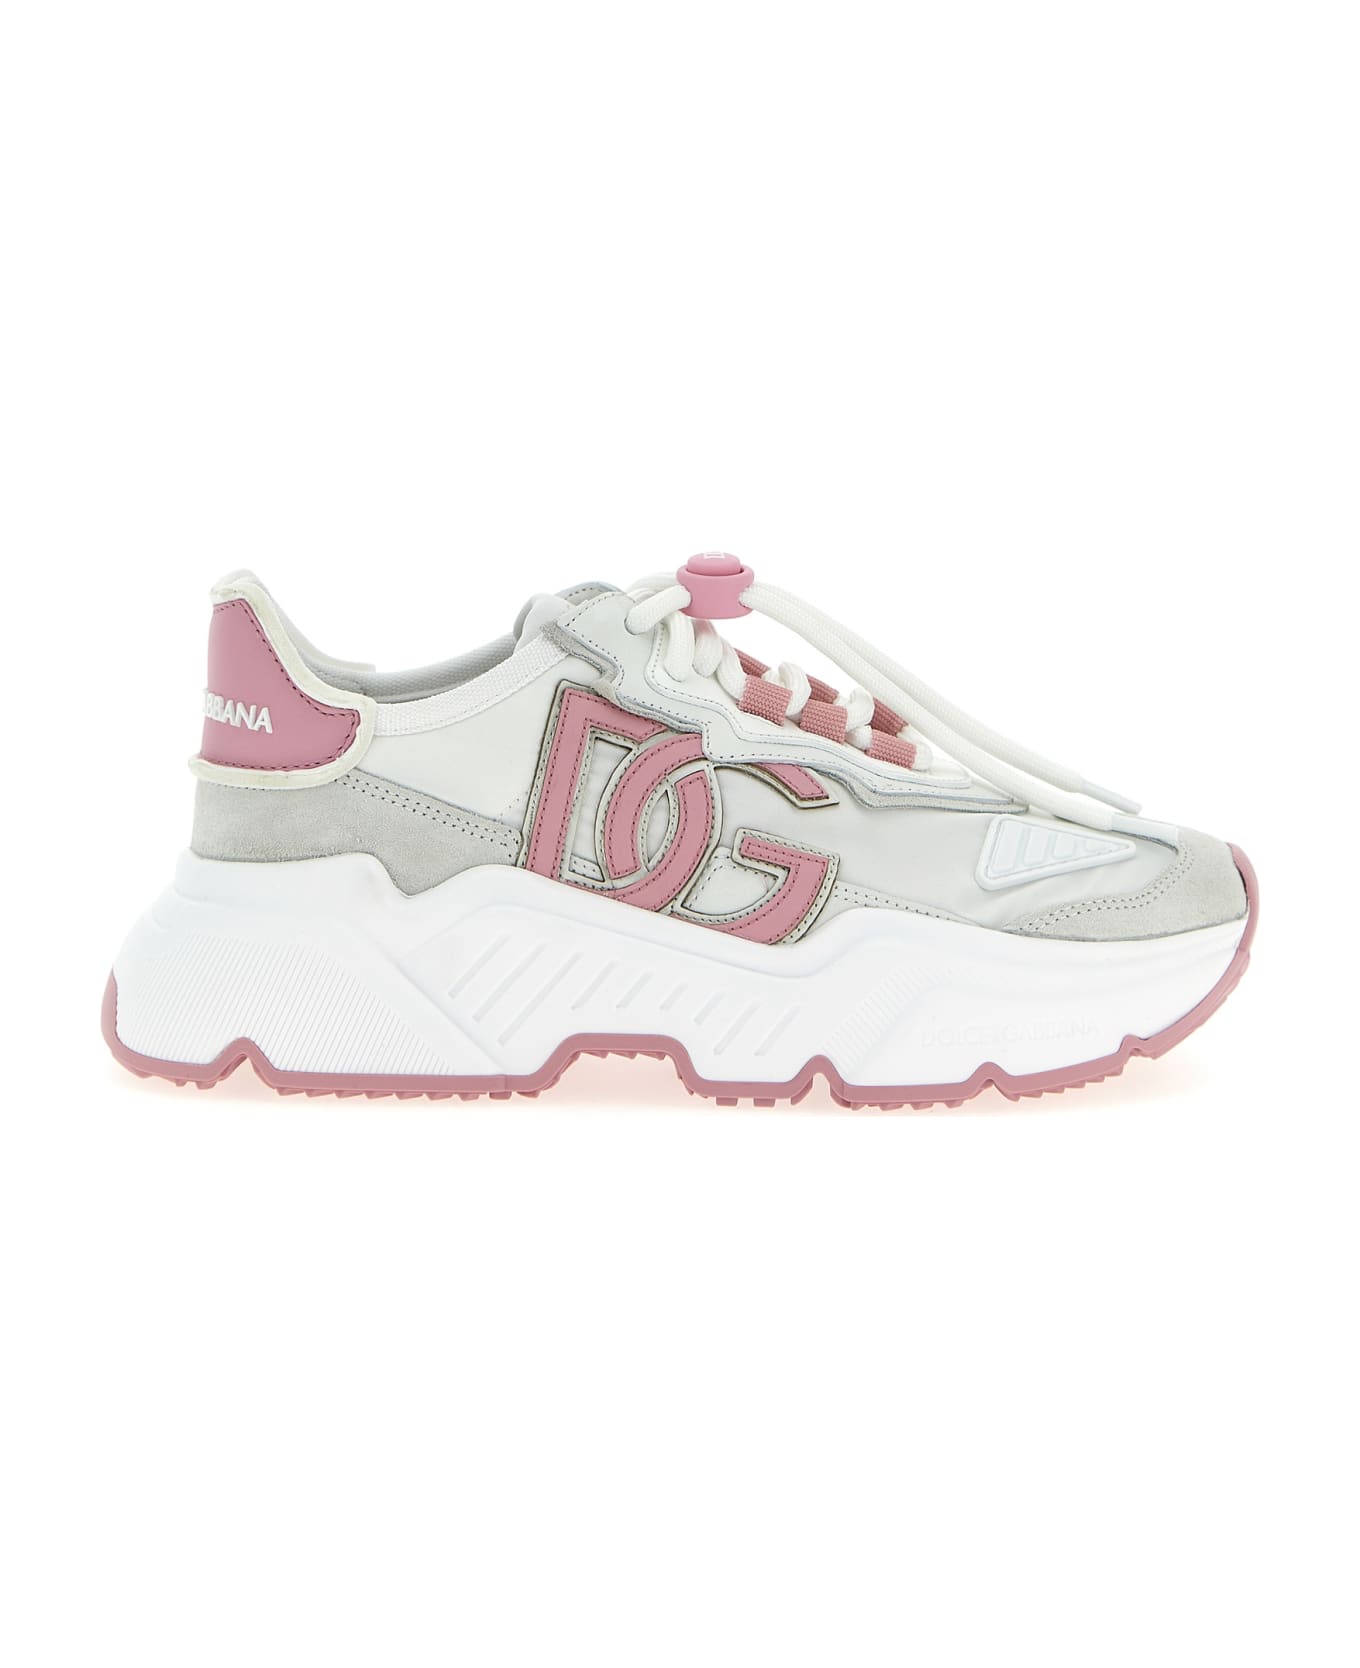 Dolce & Gabbana Daymaster Sneakers - Pink